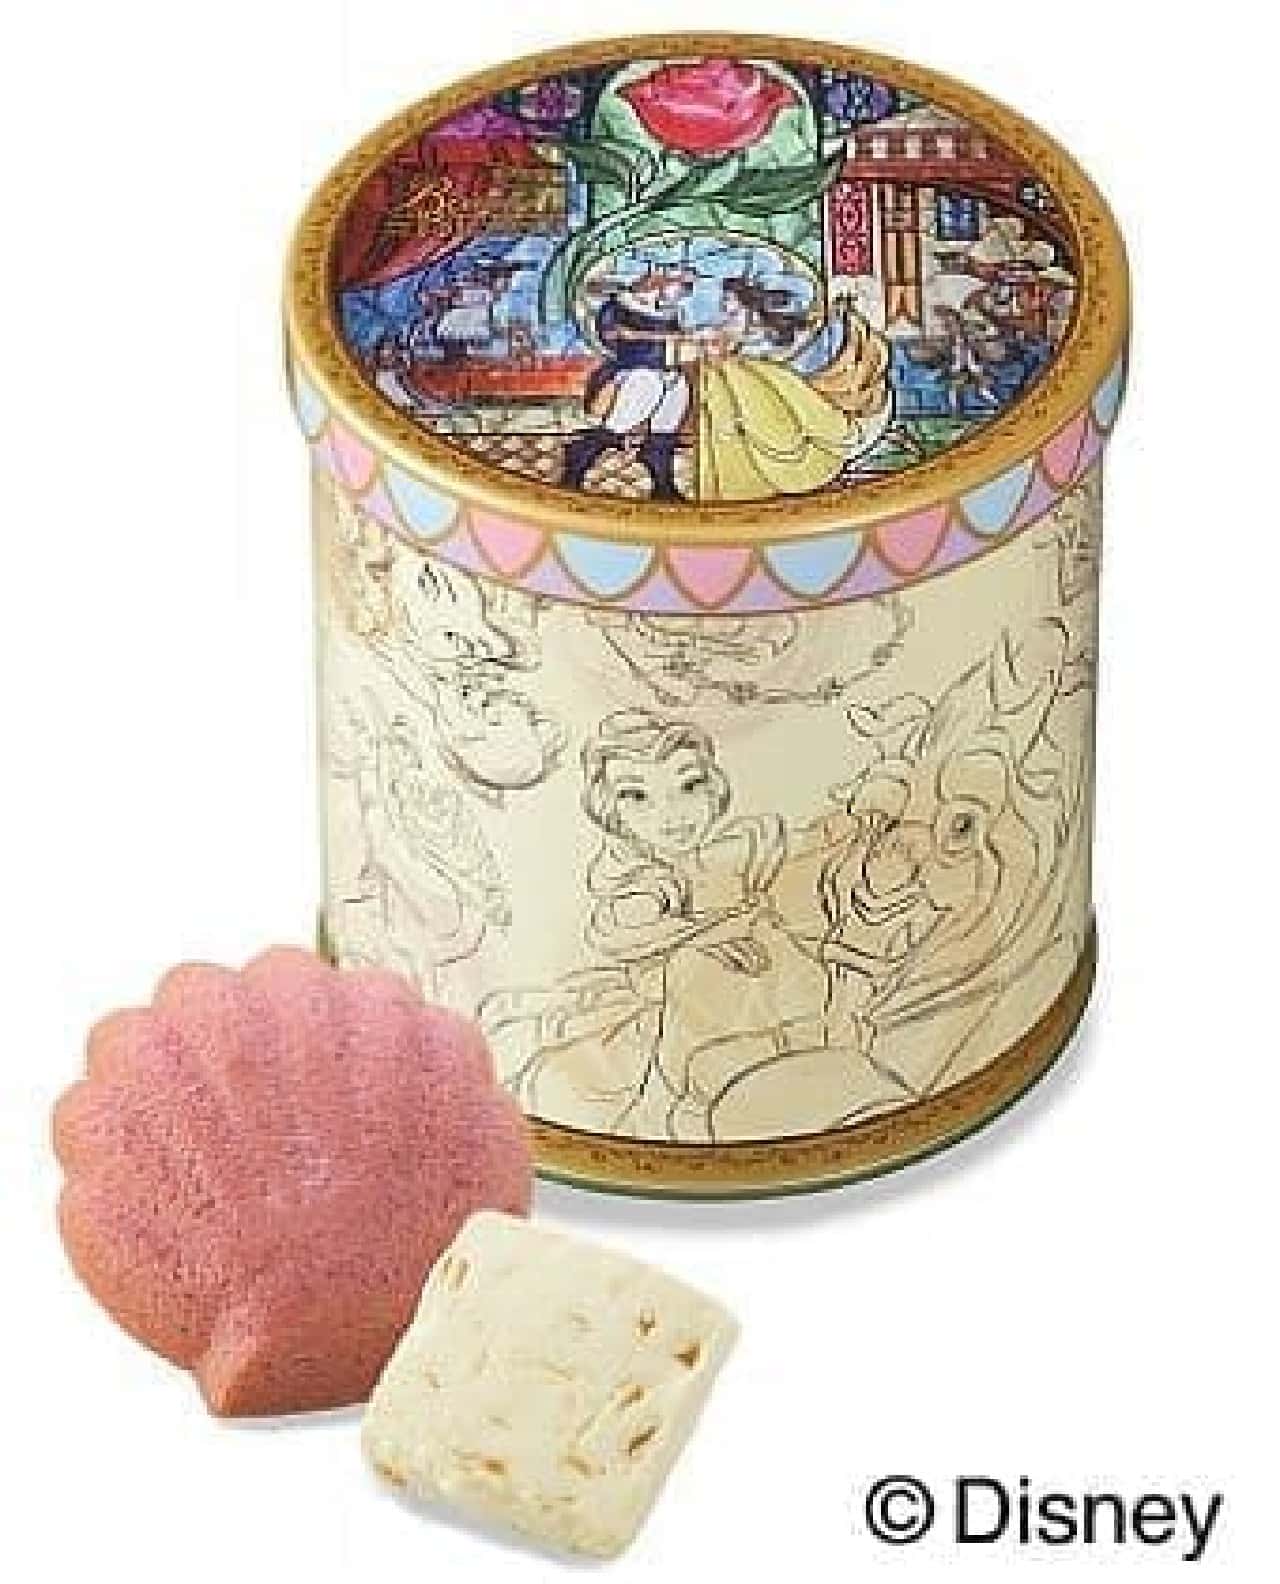 Ginza Cozy Corner "[Beauty and the Beast] Gift Can"